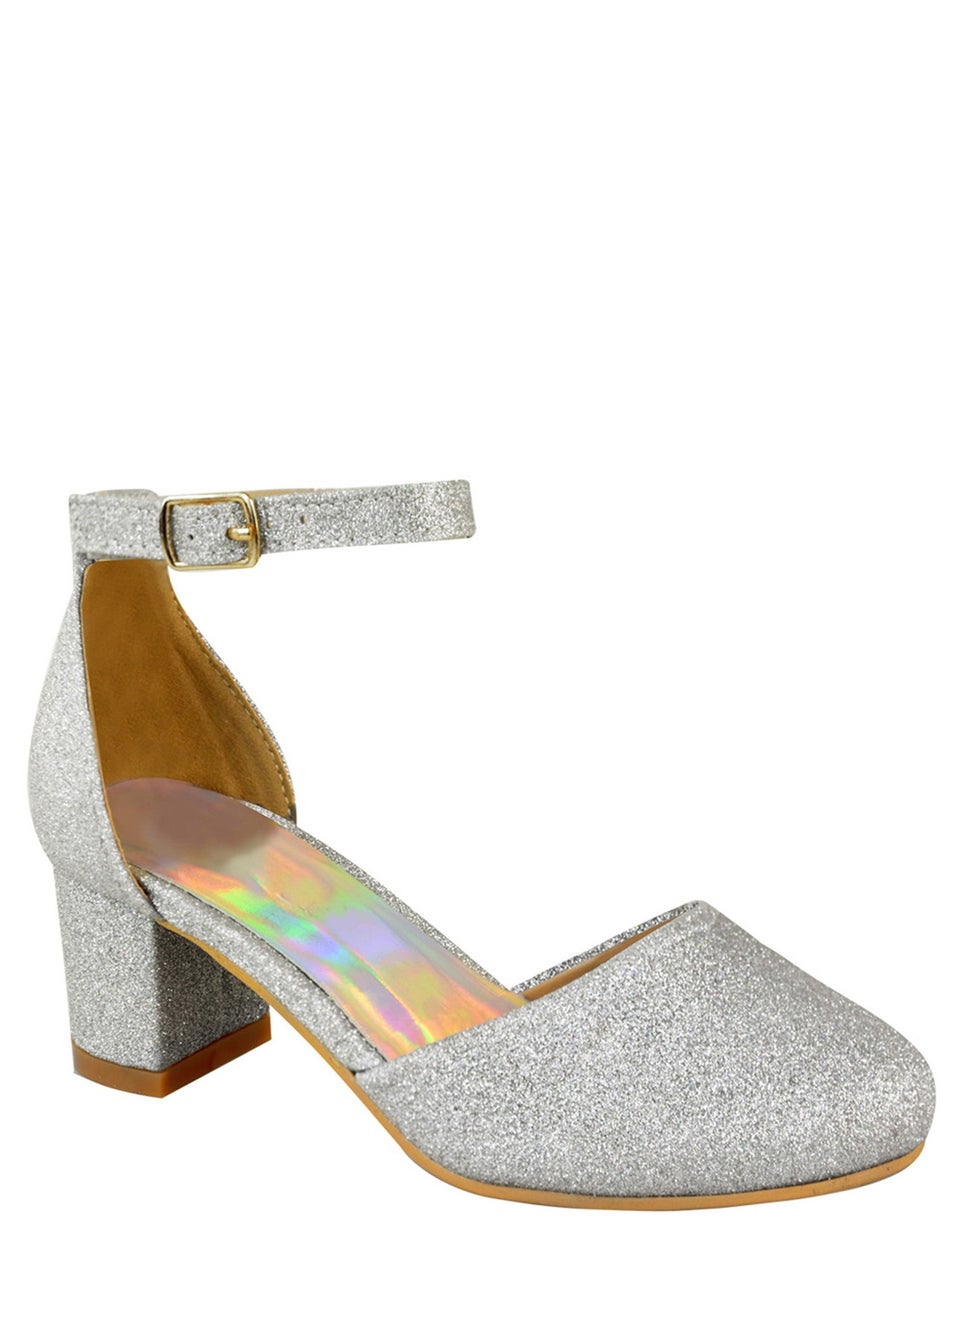 Where's That From Silver Glitter Abena Kids Mid Heel Sandals - Matalan